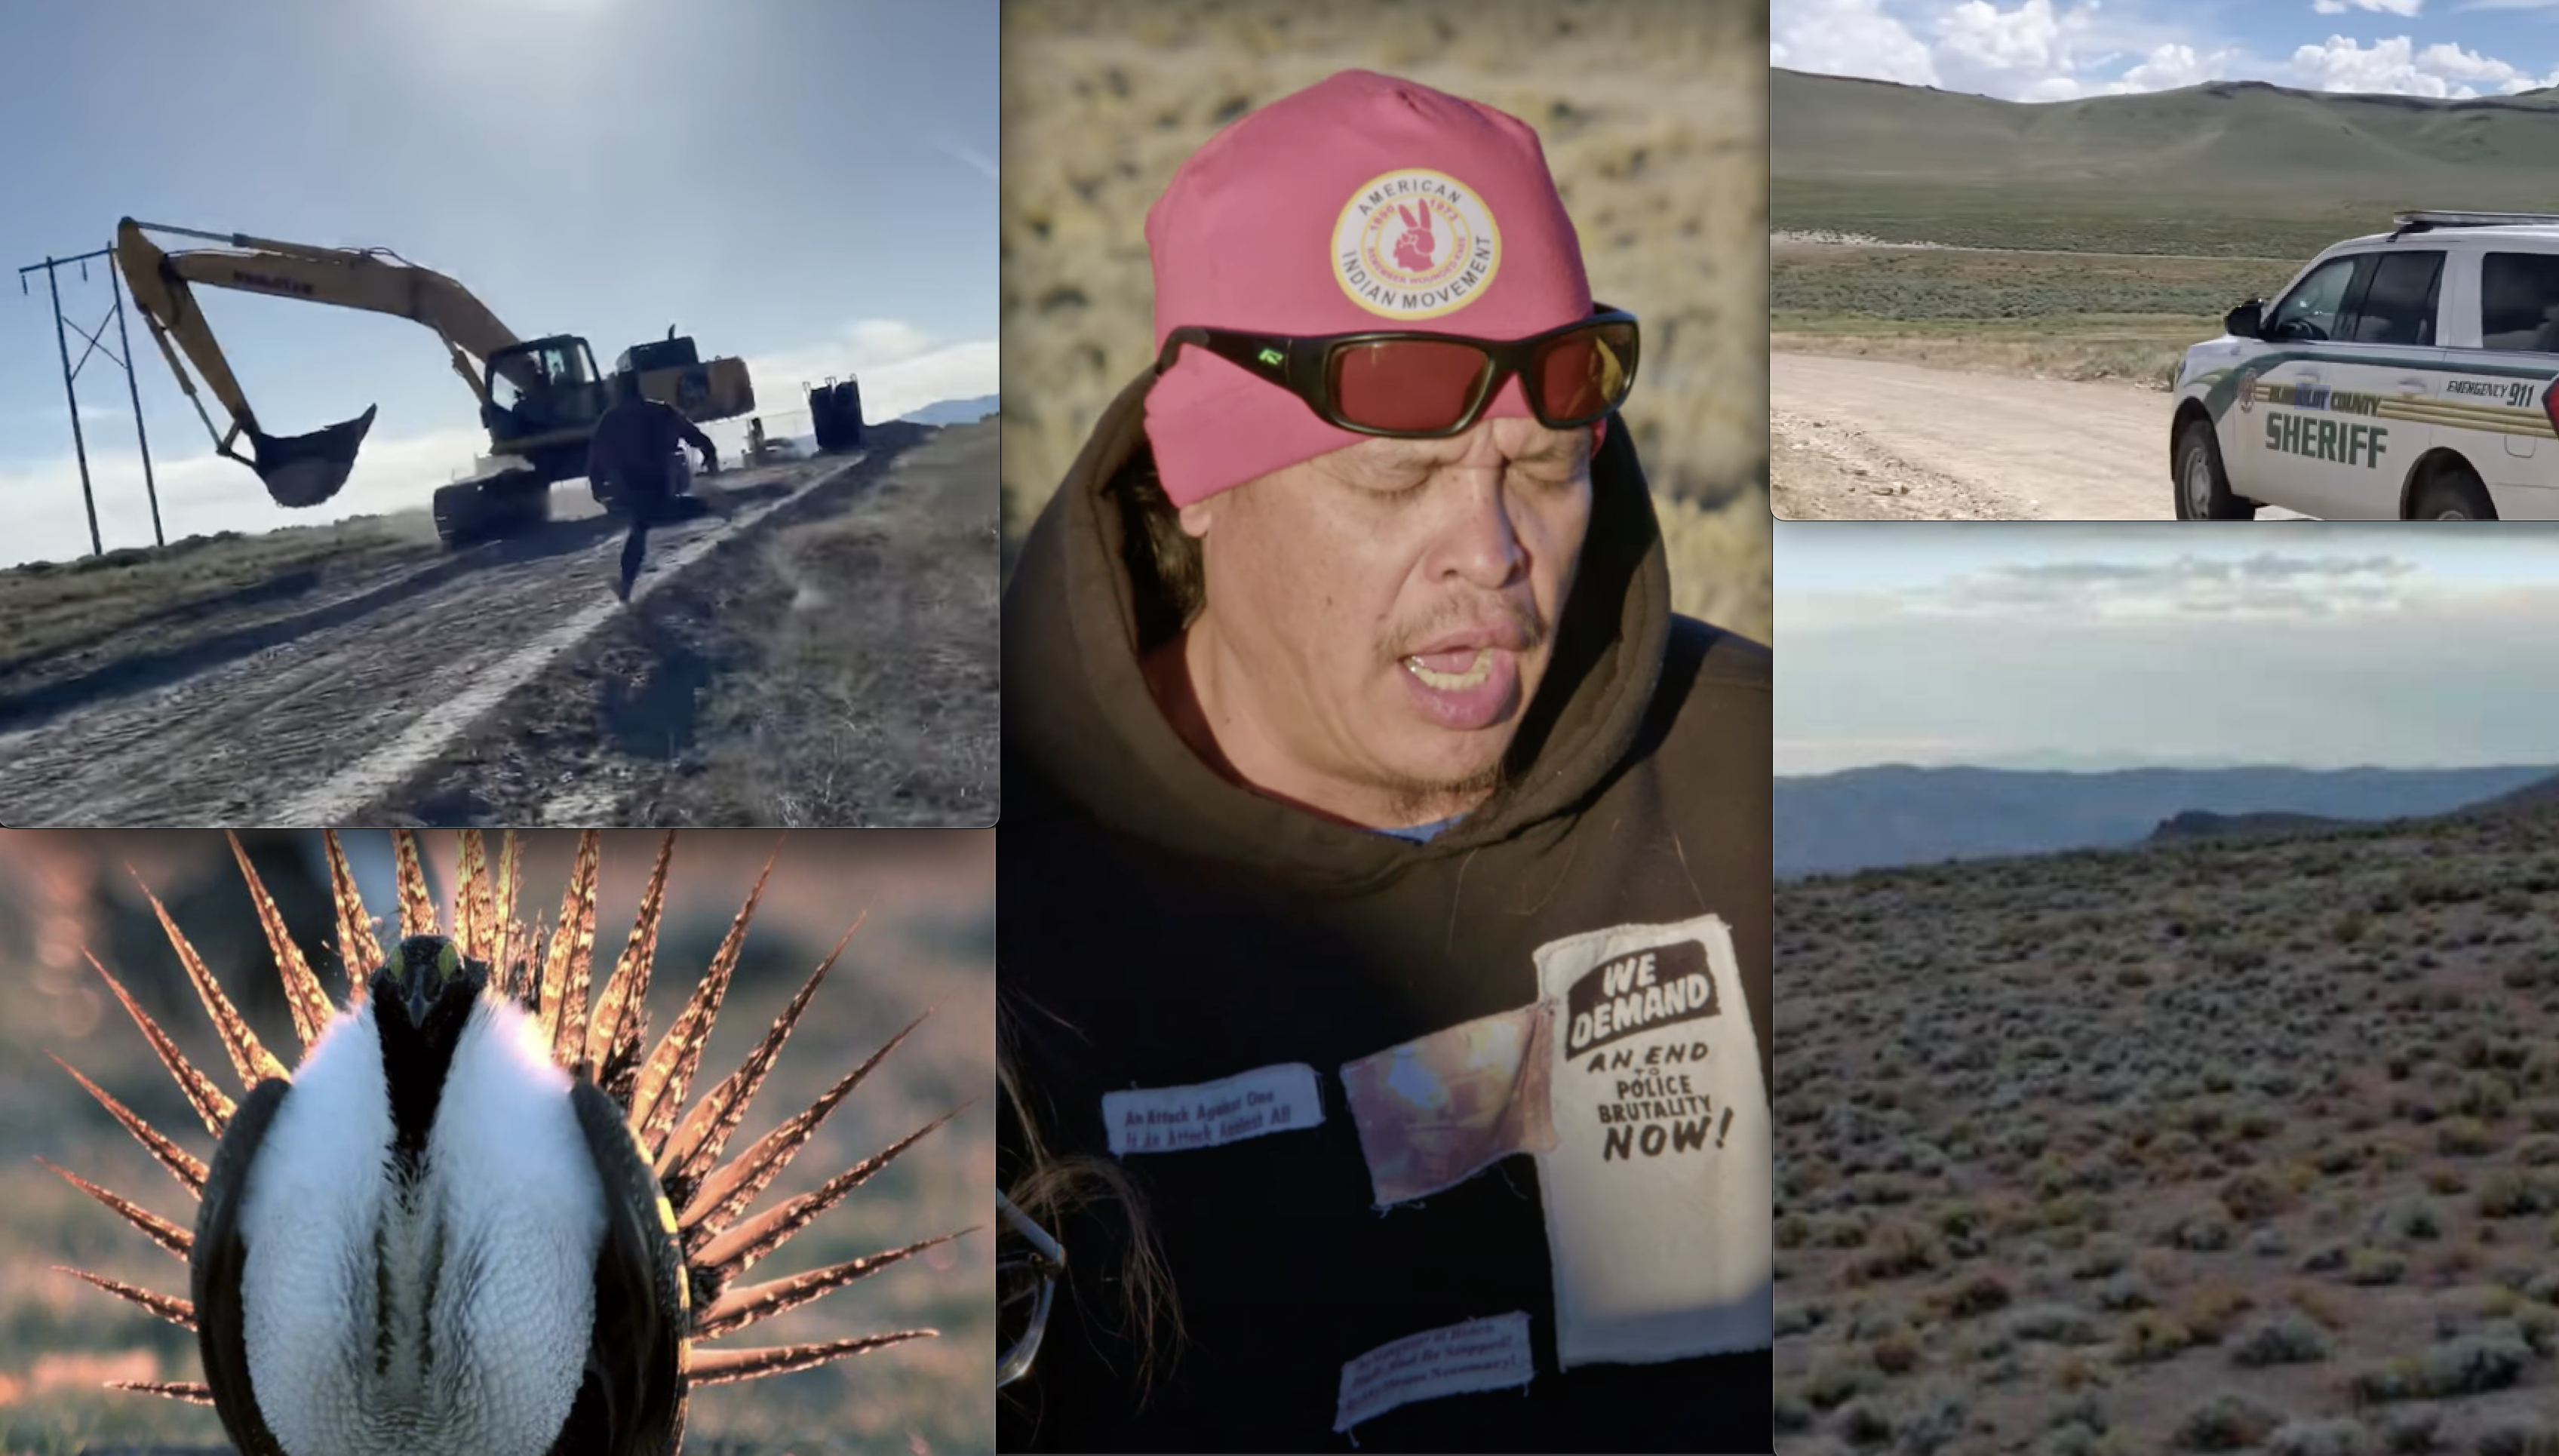 Lithium Wars Pt. 2: Teepee Camp Raided, Native Woman Arrested, Lawsuits Fly in Battle over Thacker Pass Lithium Mine in Nevada